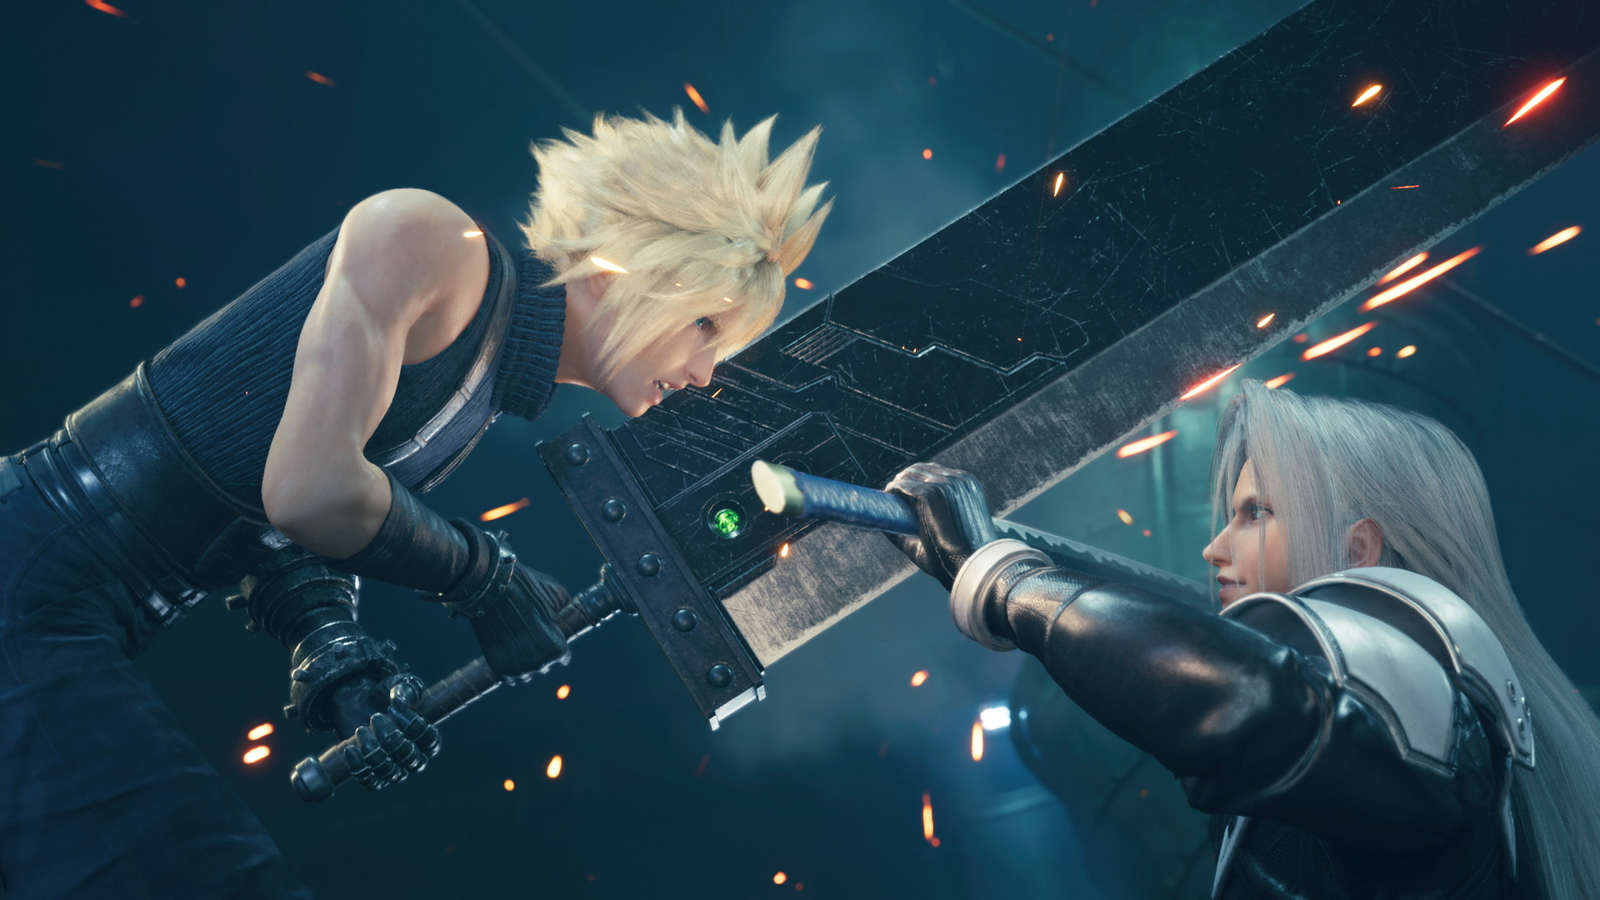 Final Fantasy 7 Remake trilogy continues with Rebirth next year